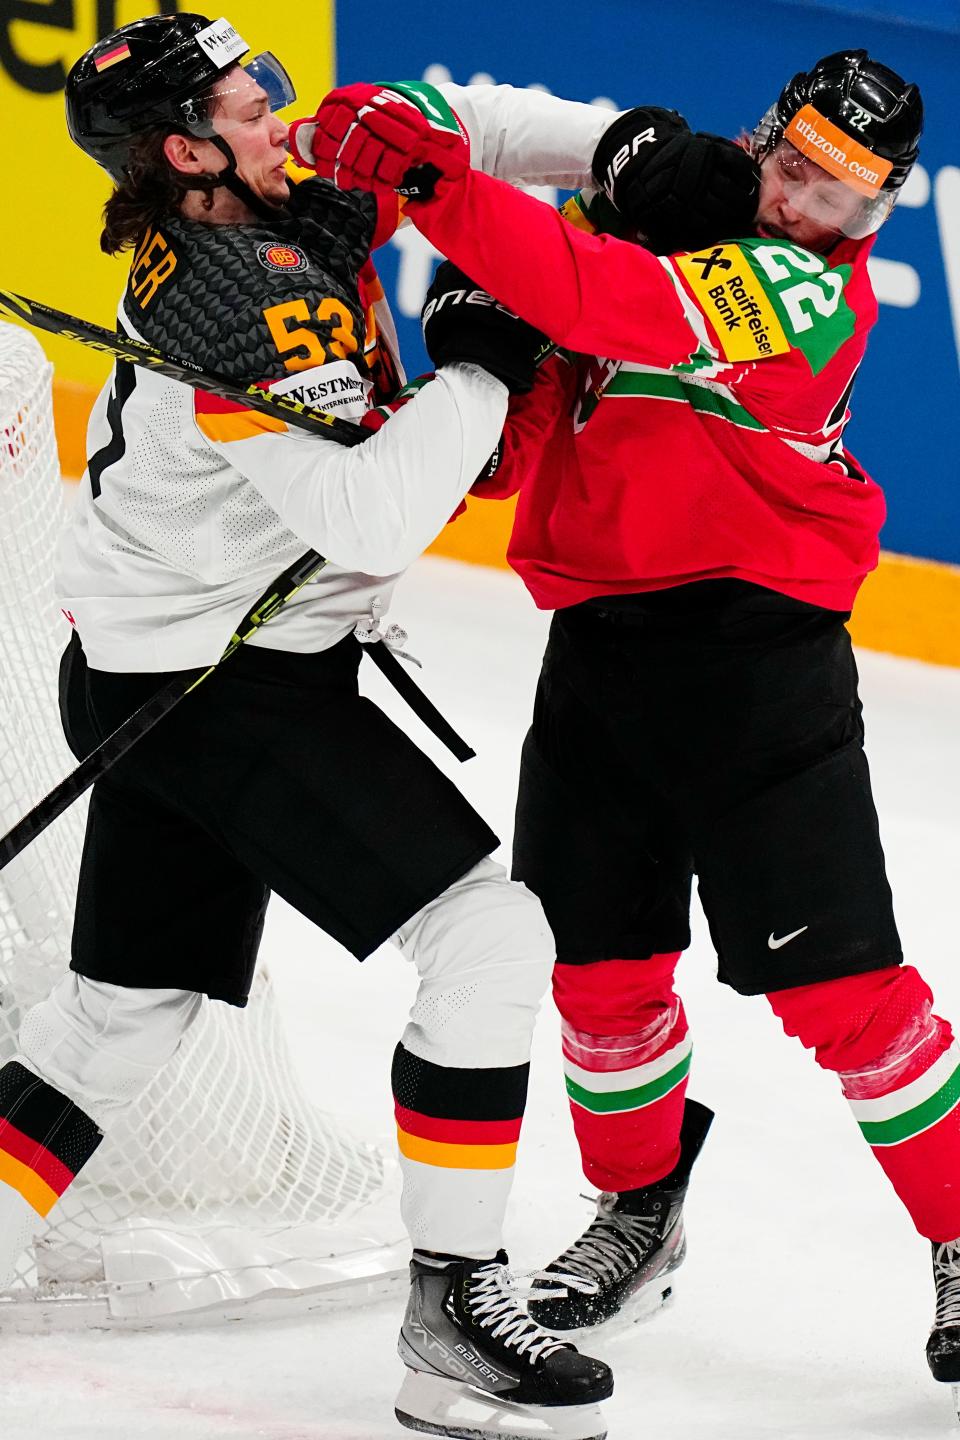 Germany's Moritz Seider, left, and Hungary's Vilmos Gallo fight at the ice hockey world championship in Tampere, Finland, Sunday, May 21, 2023.